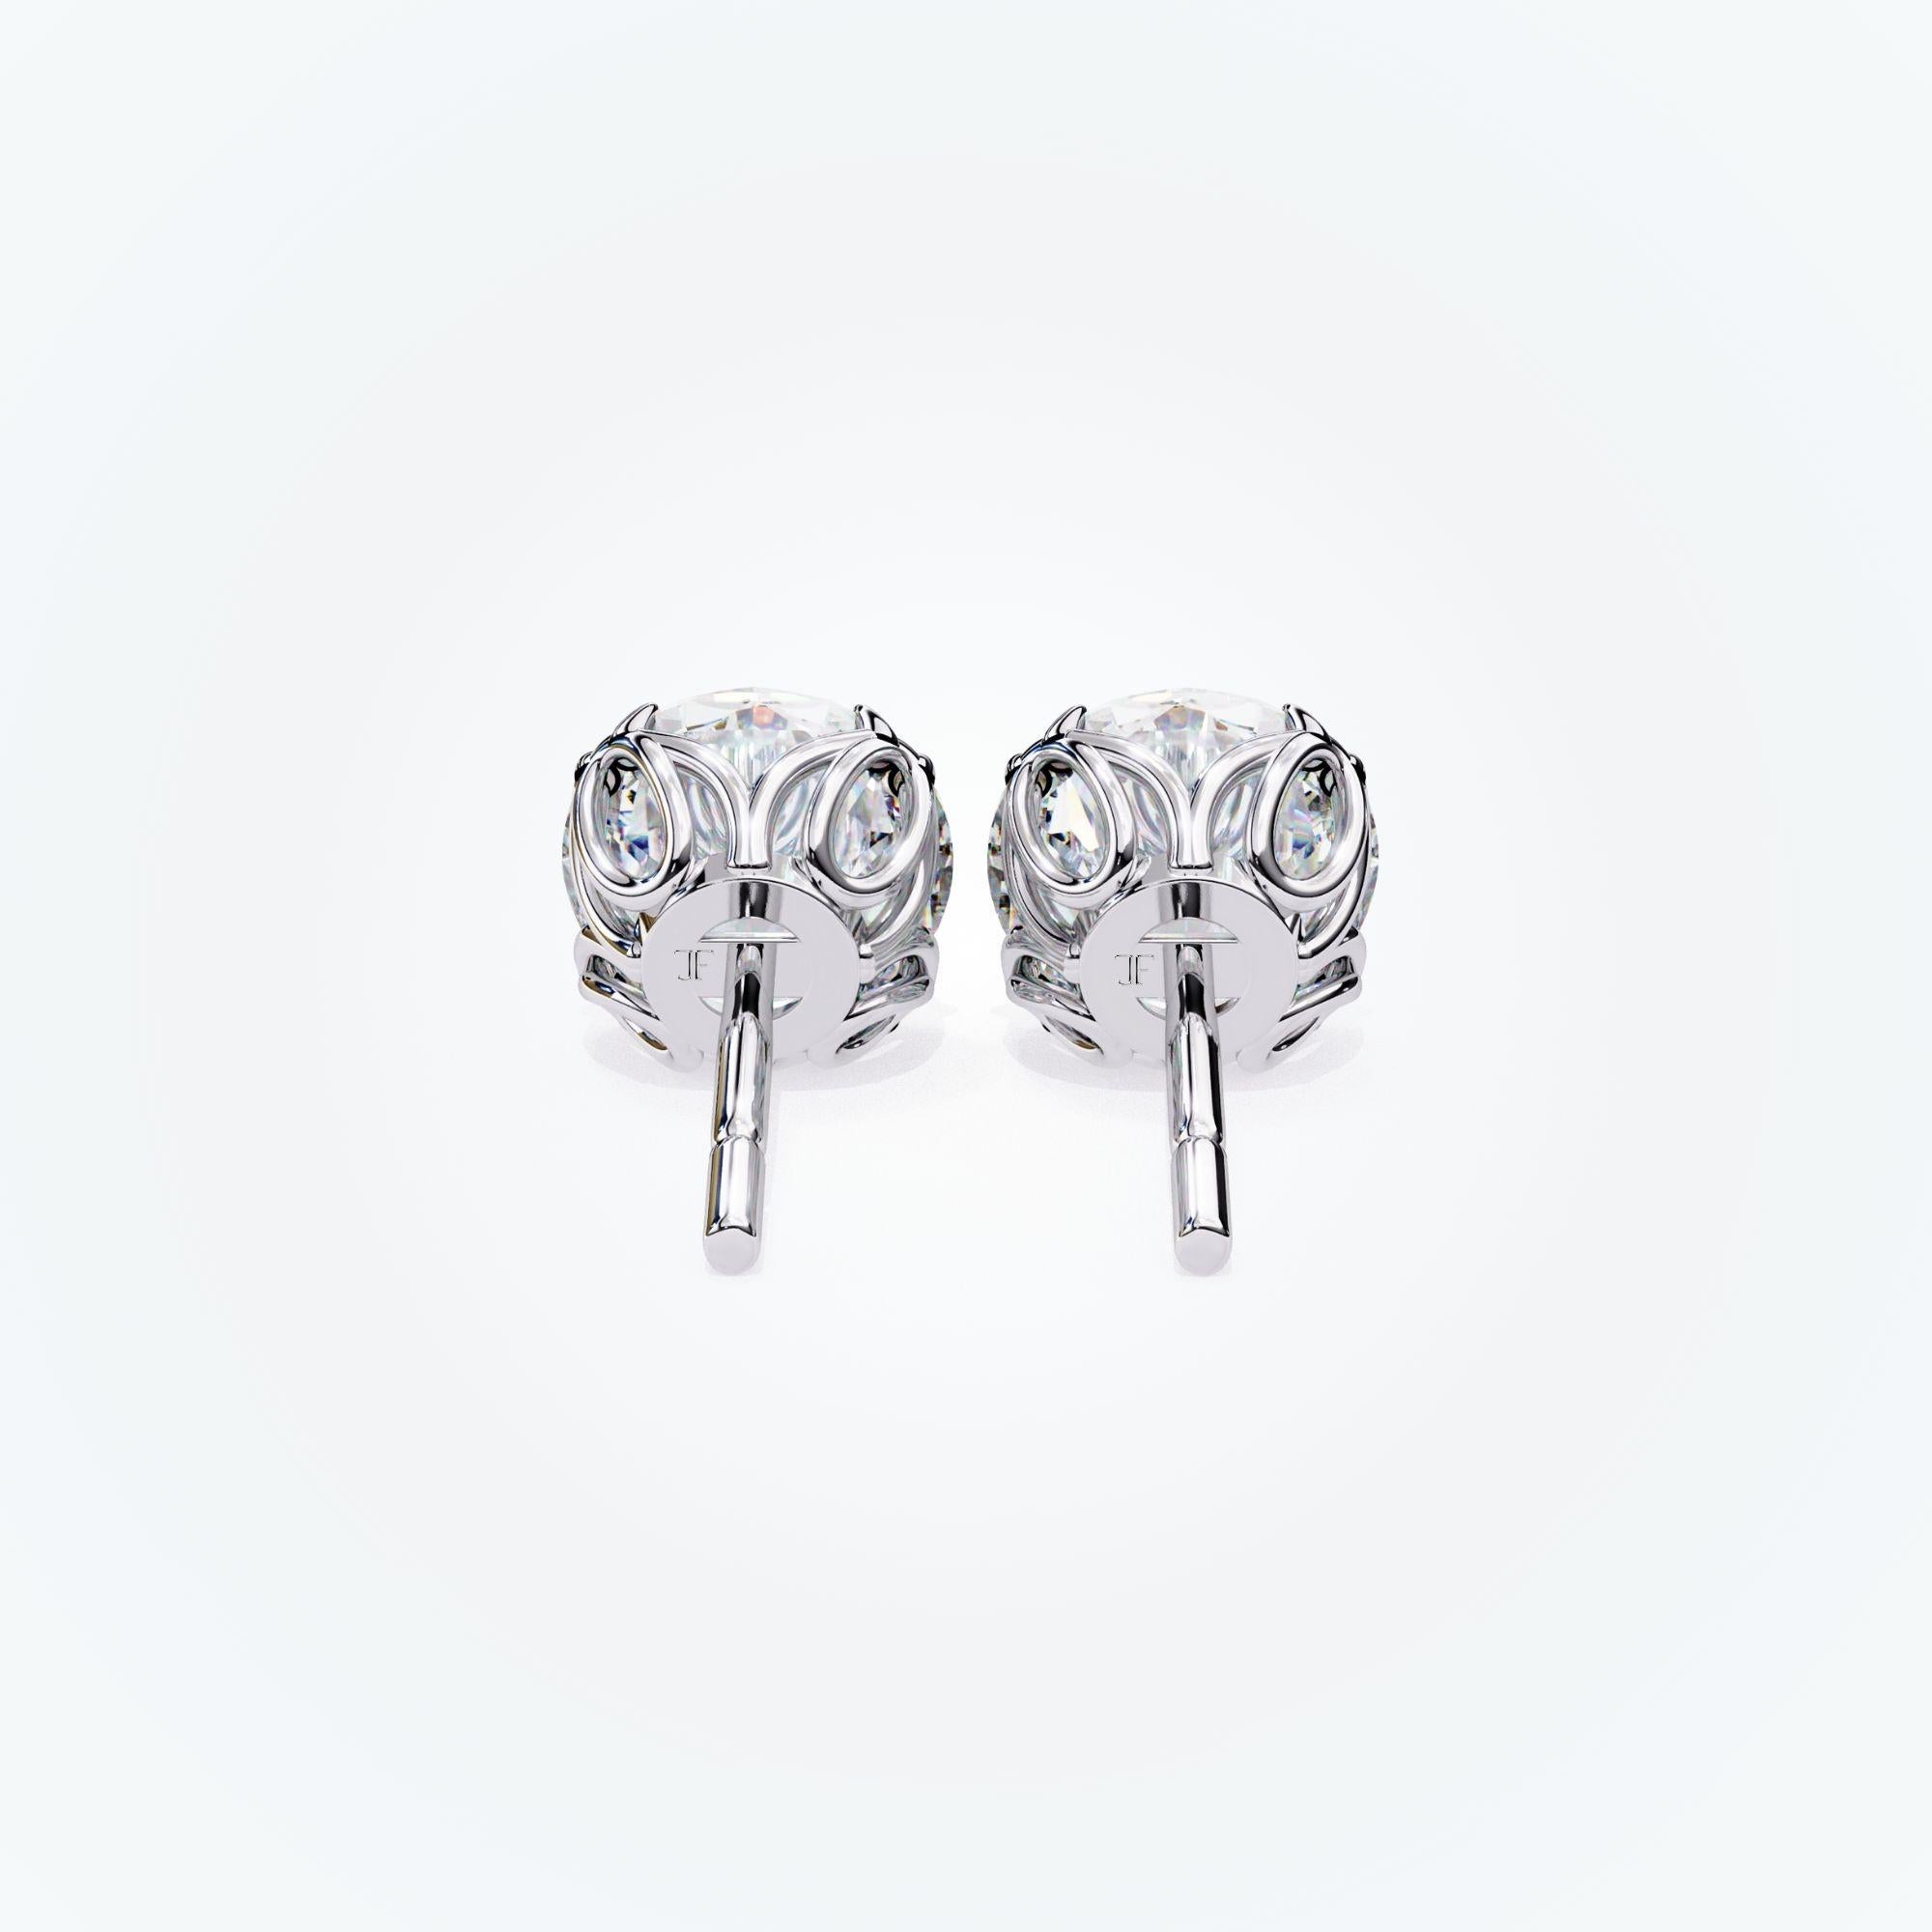 Natural Diamond Studs, Floral, 8 Prongs, 1/2 carat total weight, 14K Solid Gold For Sale 2